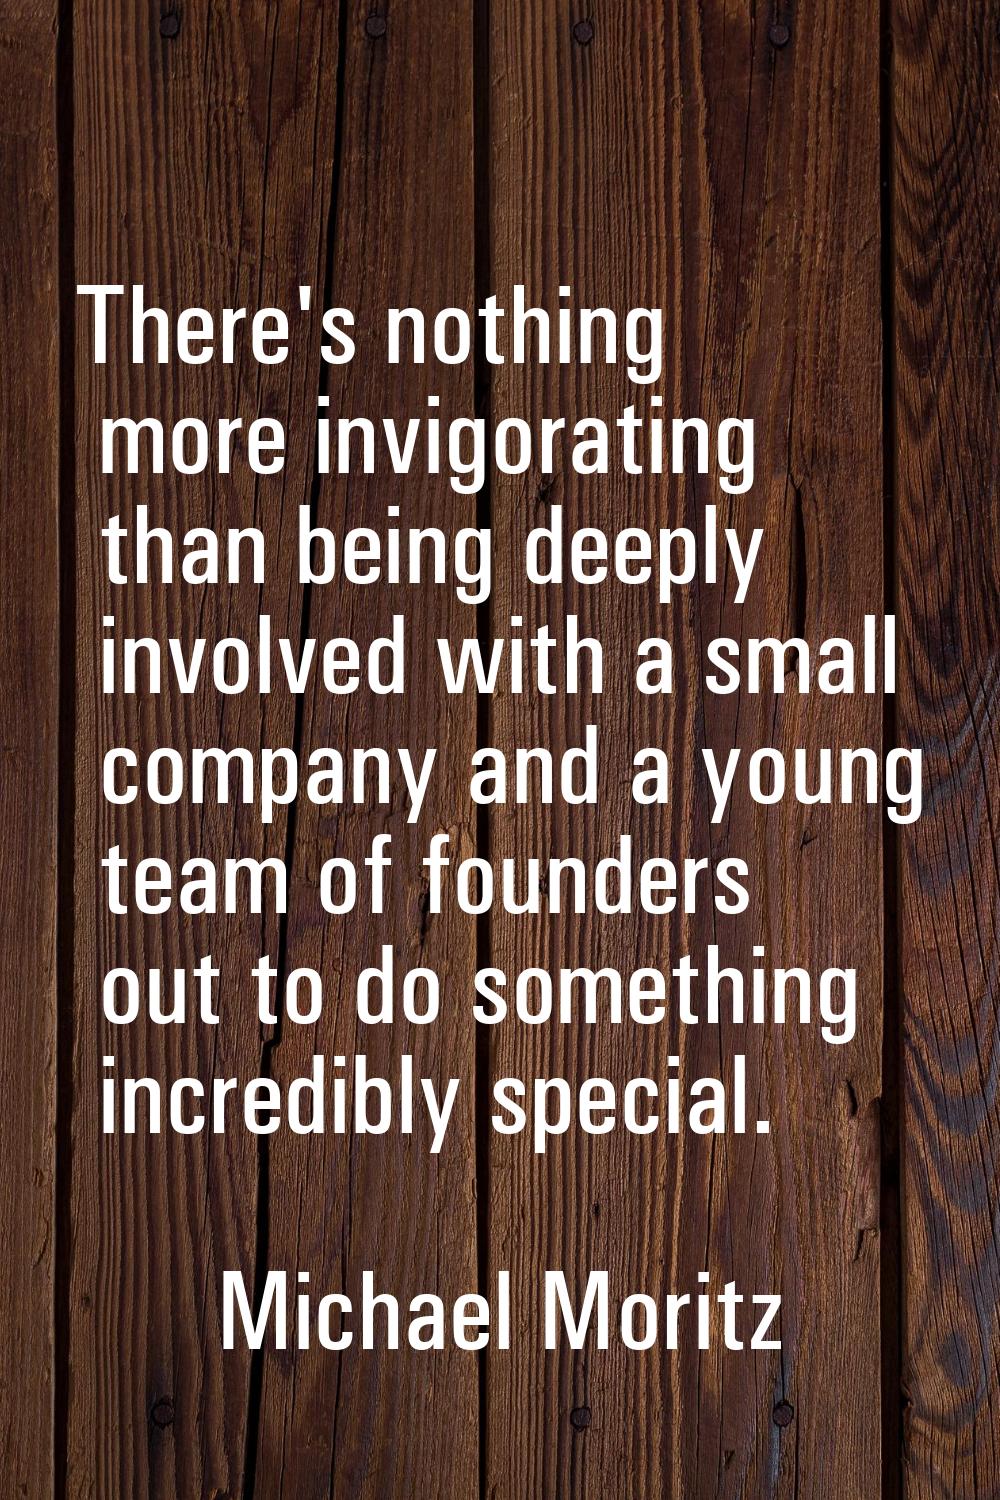 There's nothing more invigorating than being deeply involved with a small company and a young team 